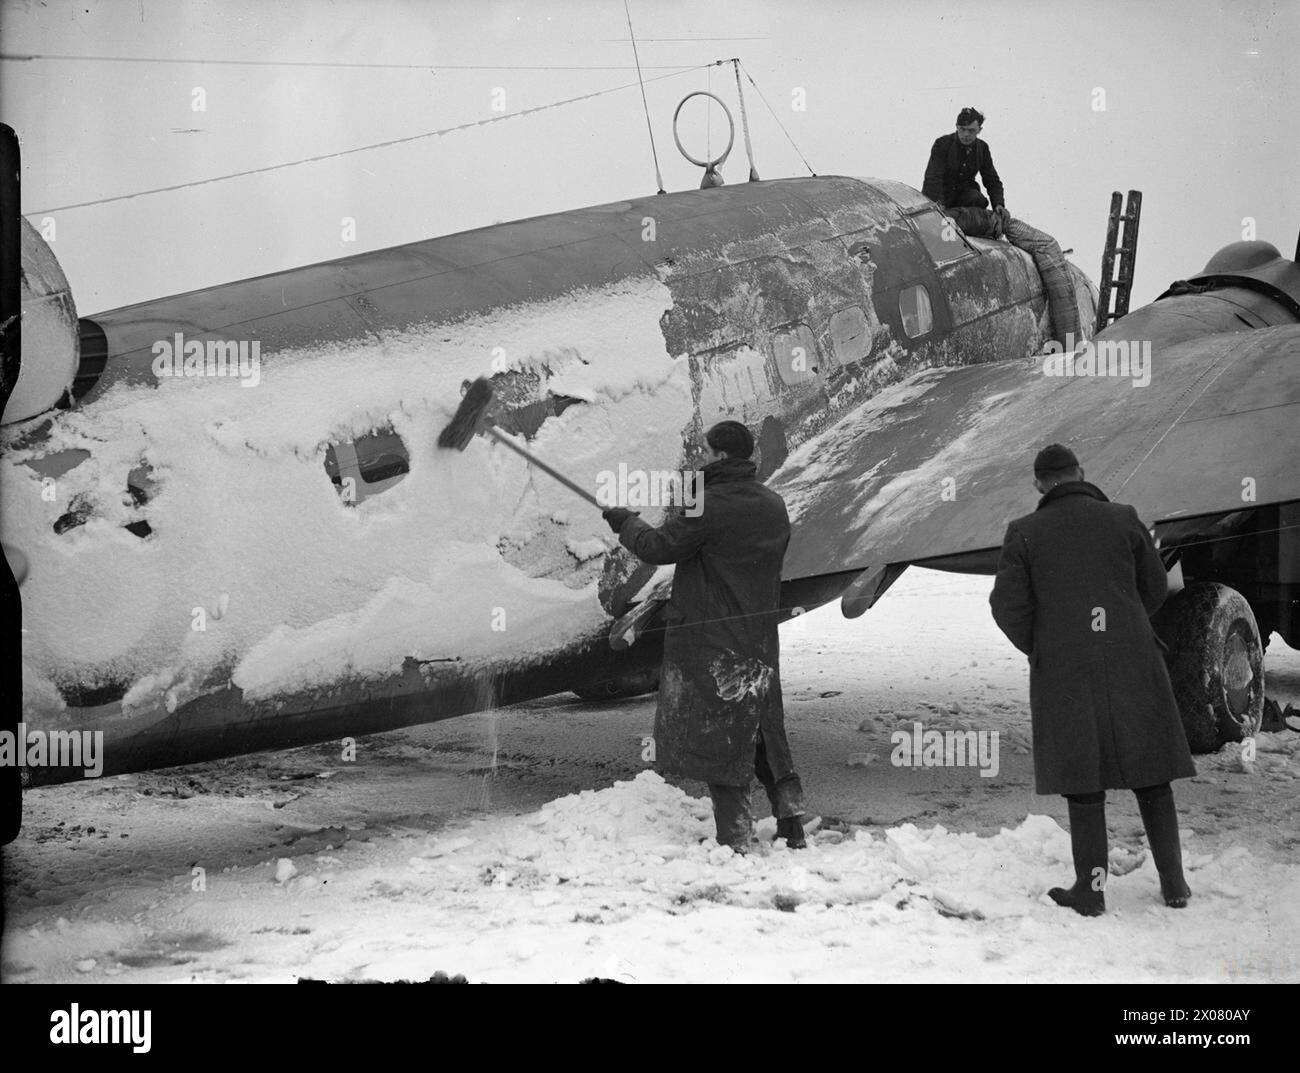 ROYAL AIR FORCE COASTAL COMMAND, 1939-1945. - Groundcrew scraping snow from a Lockheed Hudson of No. 233 Squadron RAF at Thorney Island, Hampshire  Royal Air Force, Maintenance Unit, 235 Stock Photo